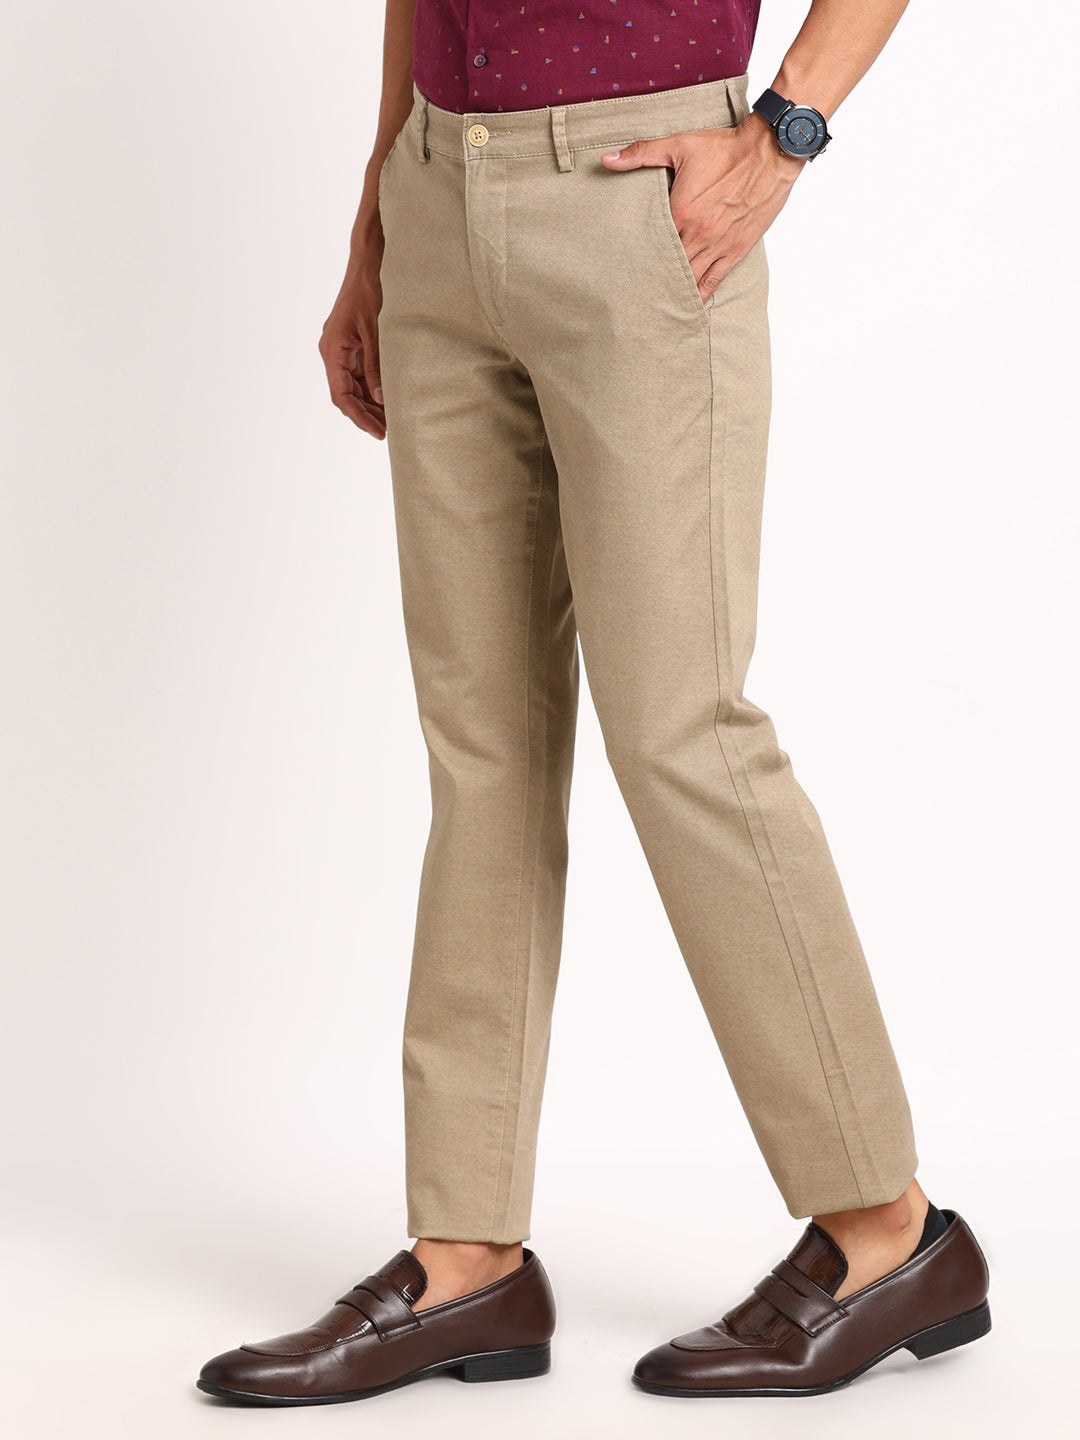 Cotton Stretch Beige Dobby Ultra Slim Fit Flat Front Casual Trouser